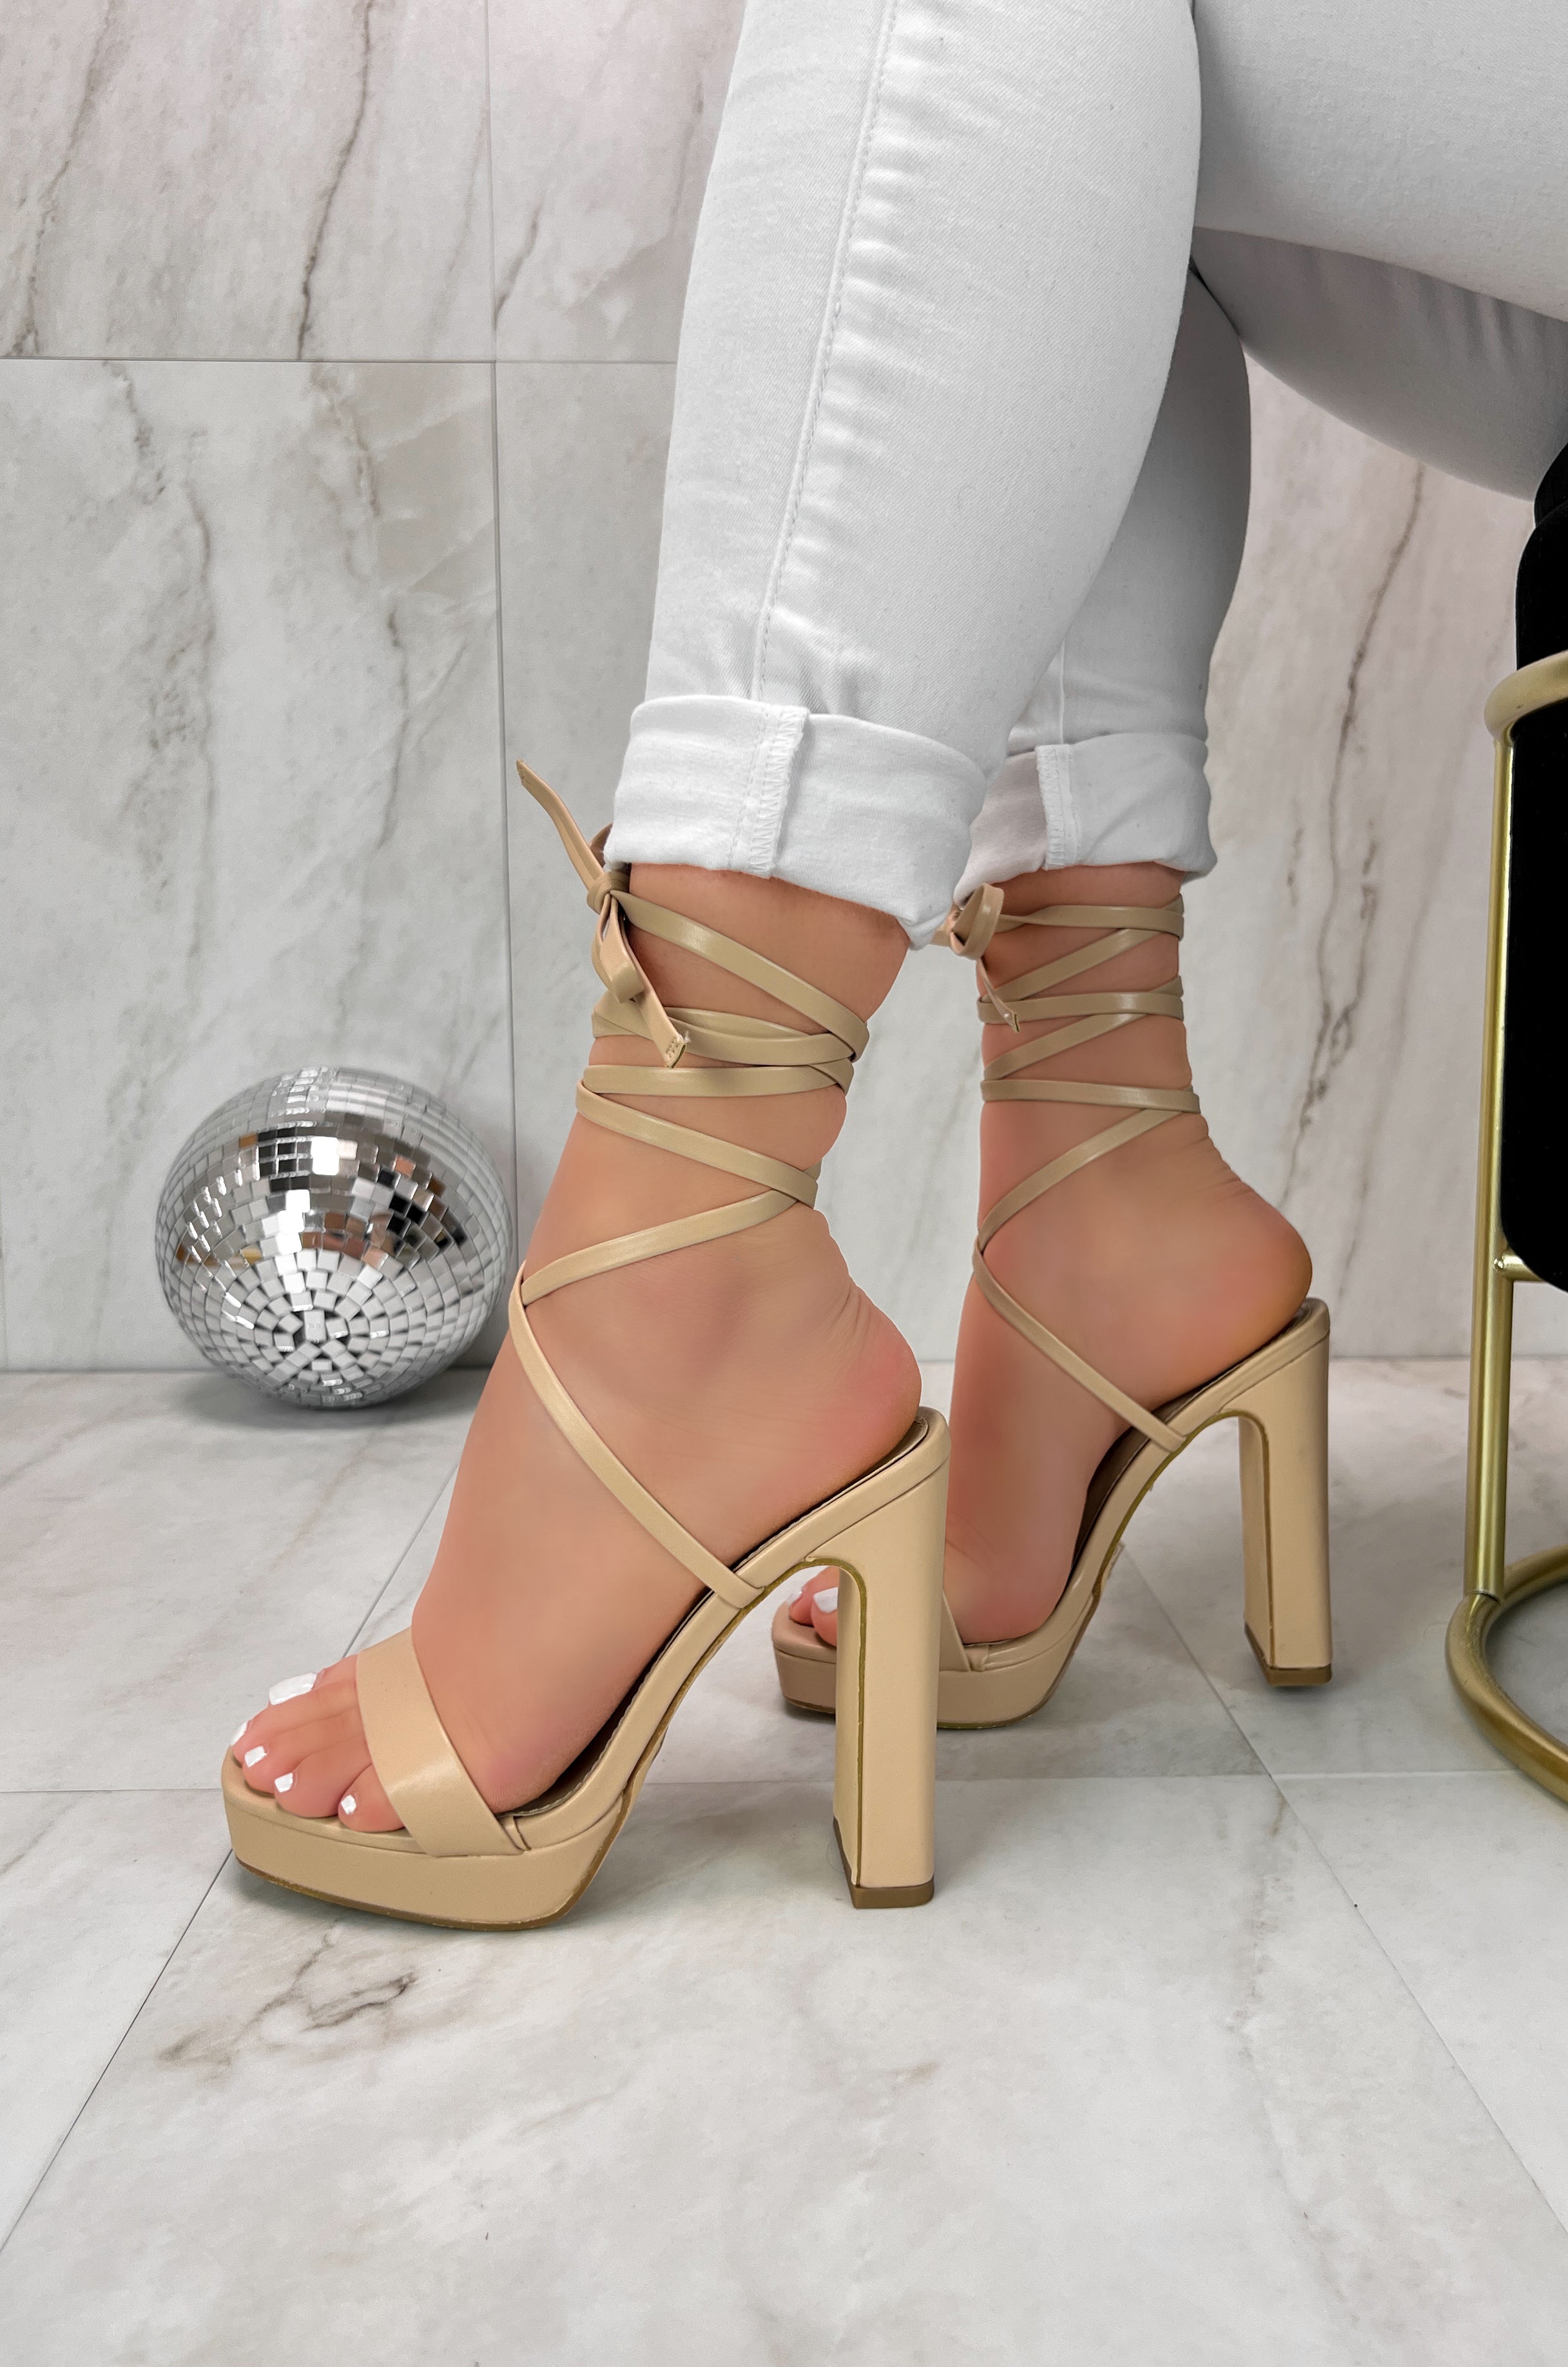 Lace Up Heels - Buy Lace Up Heels online in India